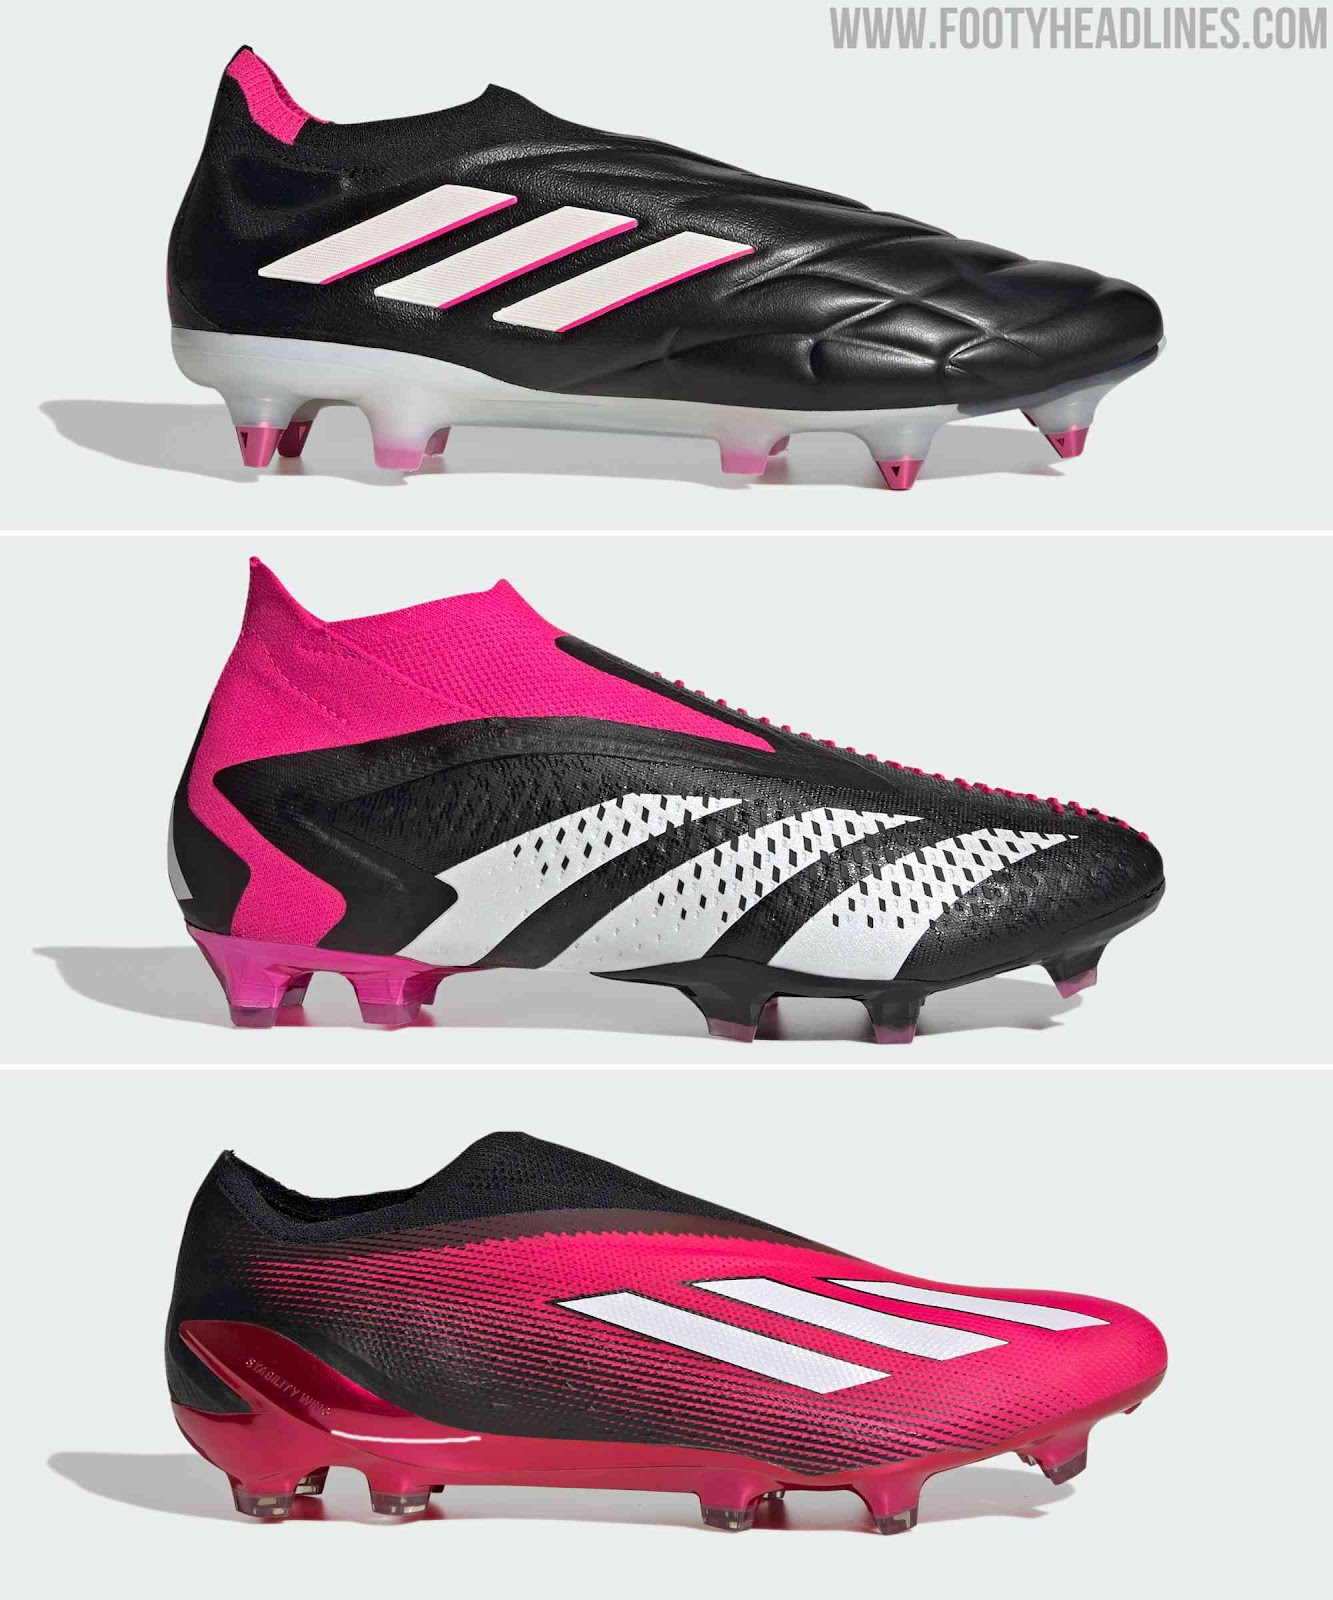 Adidas "Own Your Football" Boots Pack - First Adidas On-Pitch Collection - Ft. Next-Gen Copa & Predator - Footy Headlines